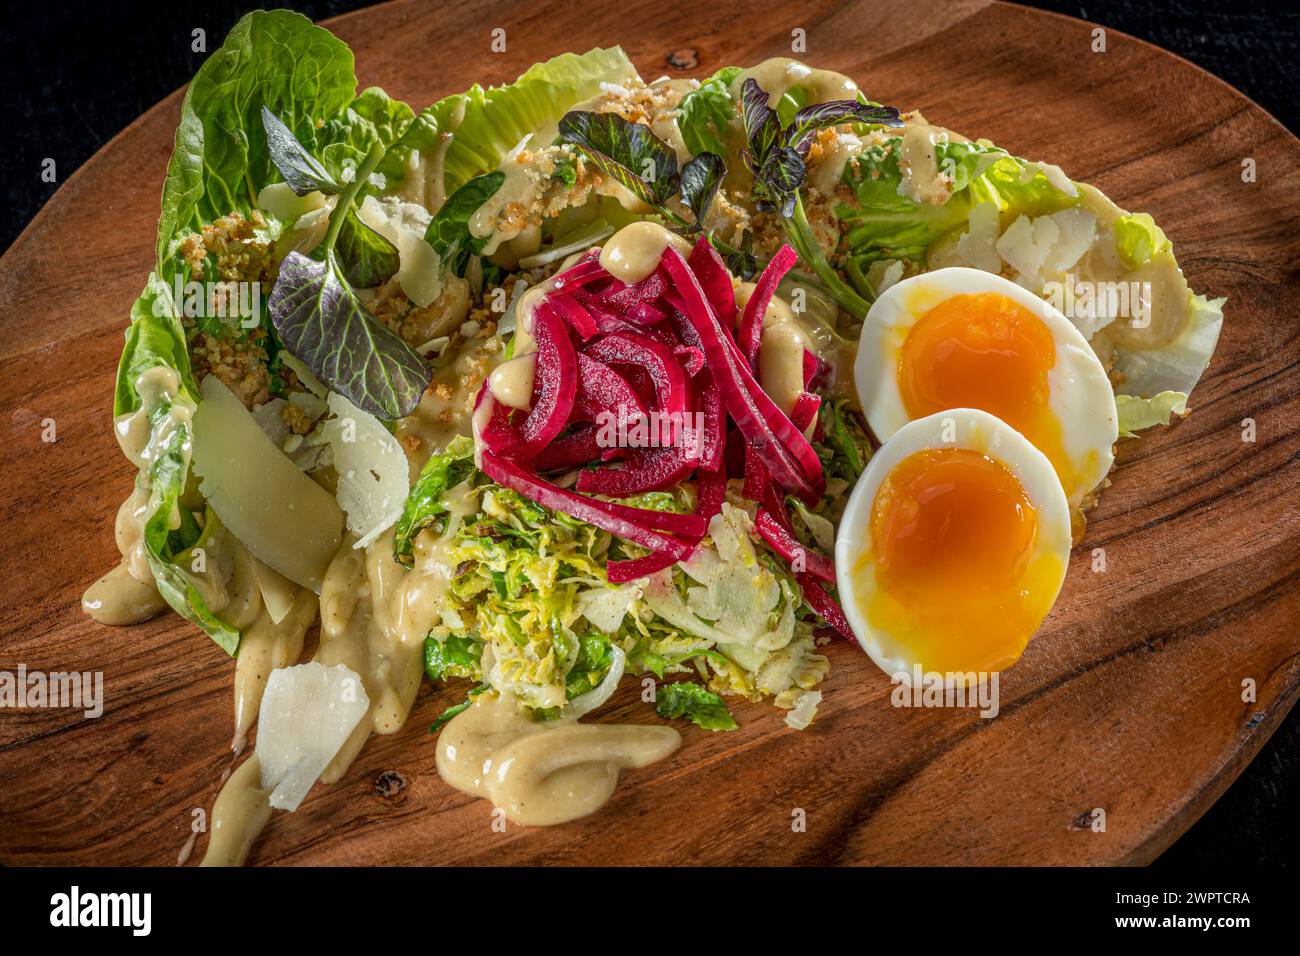 Salad on wooden plate with soft boiled egg Stock Photo